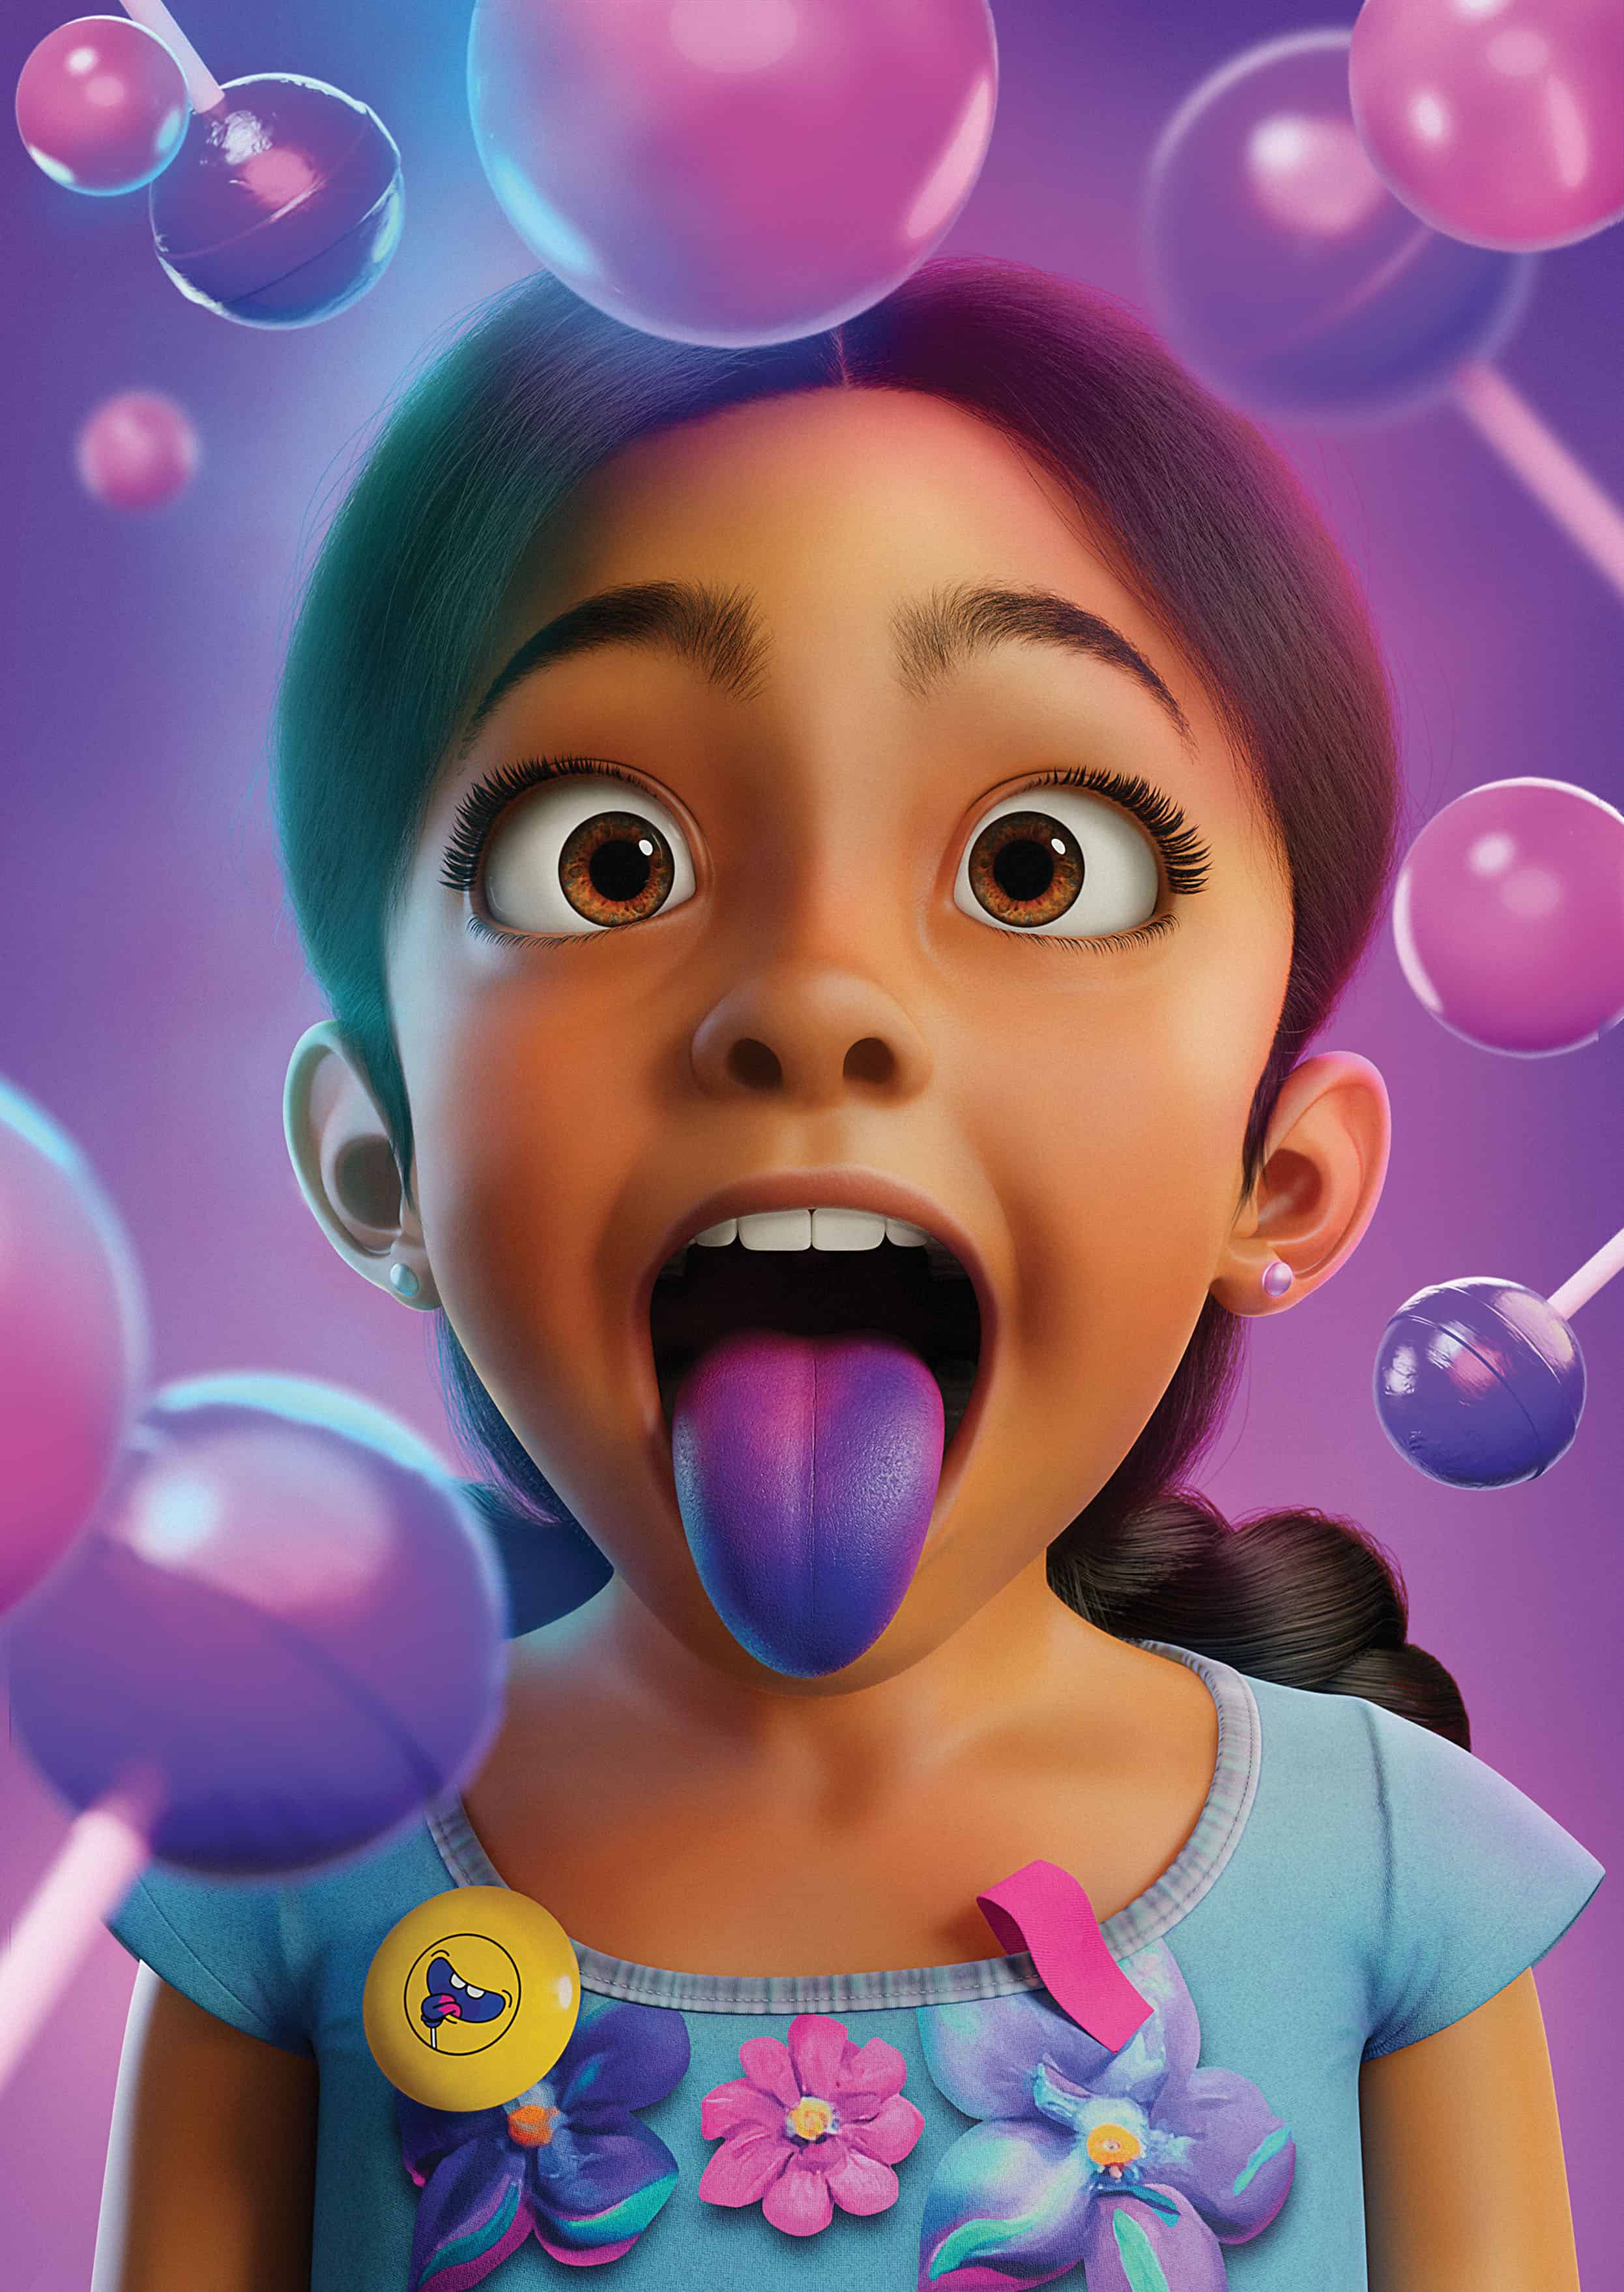 an ai generated cgi animation style girl with light brown skin, black hair and brown eyes is sticking her bright purple tongue out. around her are purple lollies, the source of the purple tongue. there are also pink bubbles around.